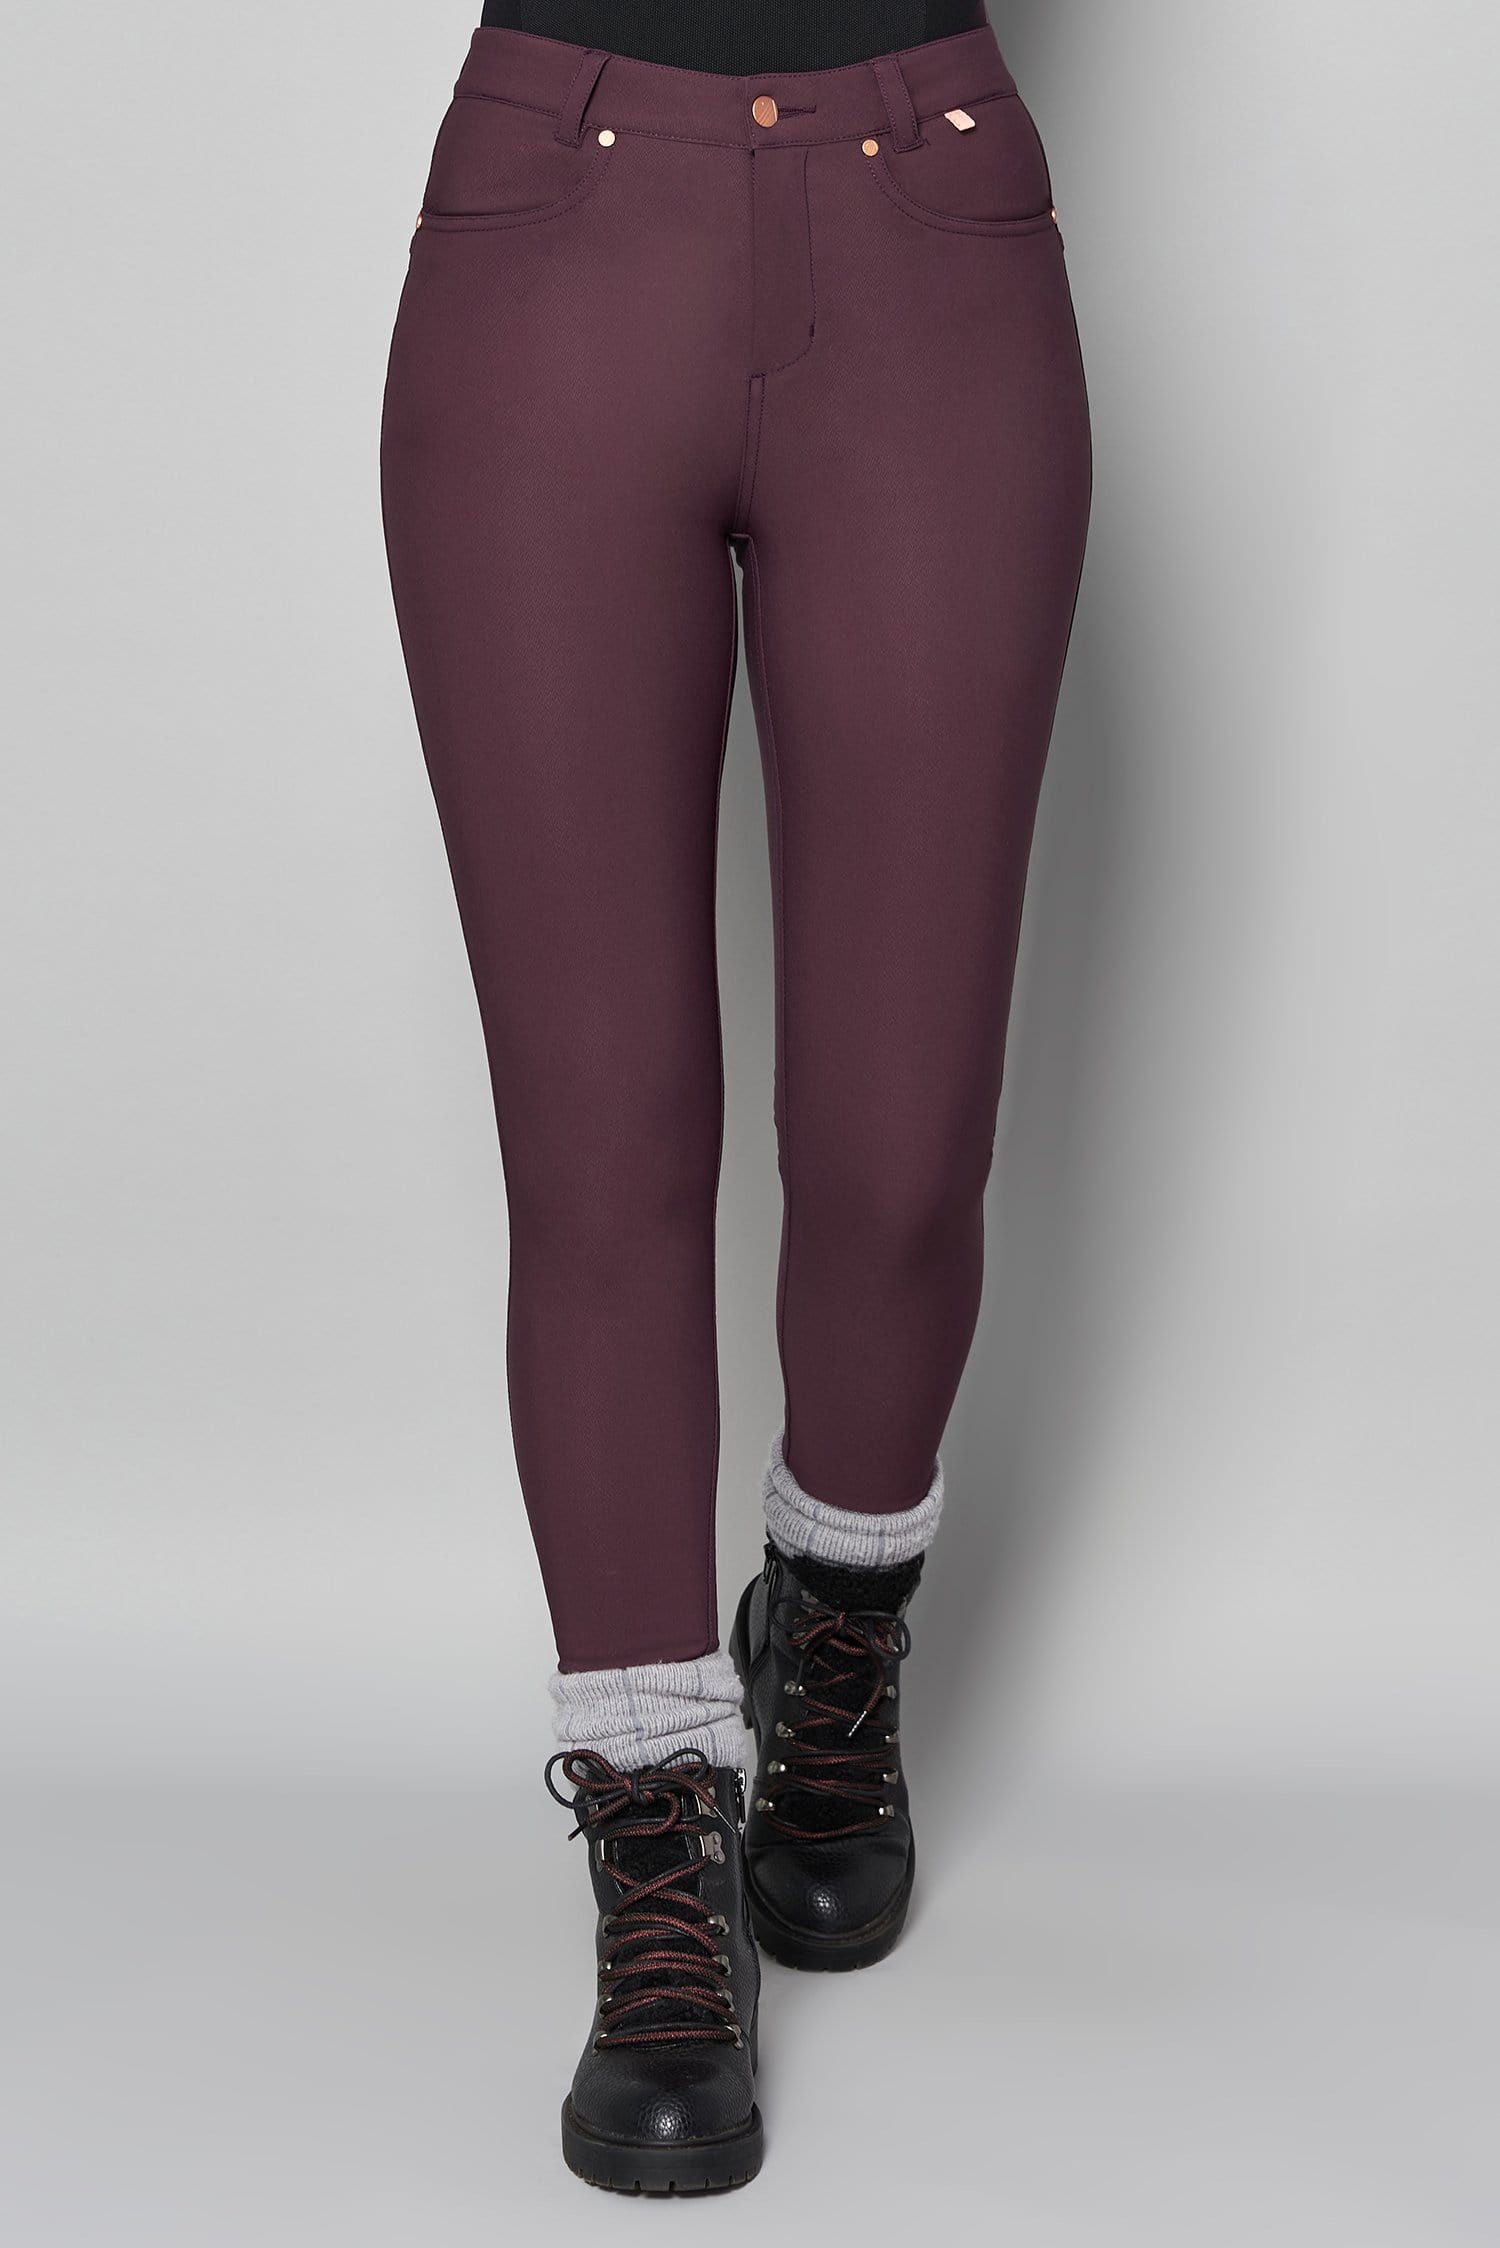 Thermal Skinny Outdoor Trousers - Aubergine - 32r / Uk14 - Womens - Acai Outdoorwear